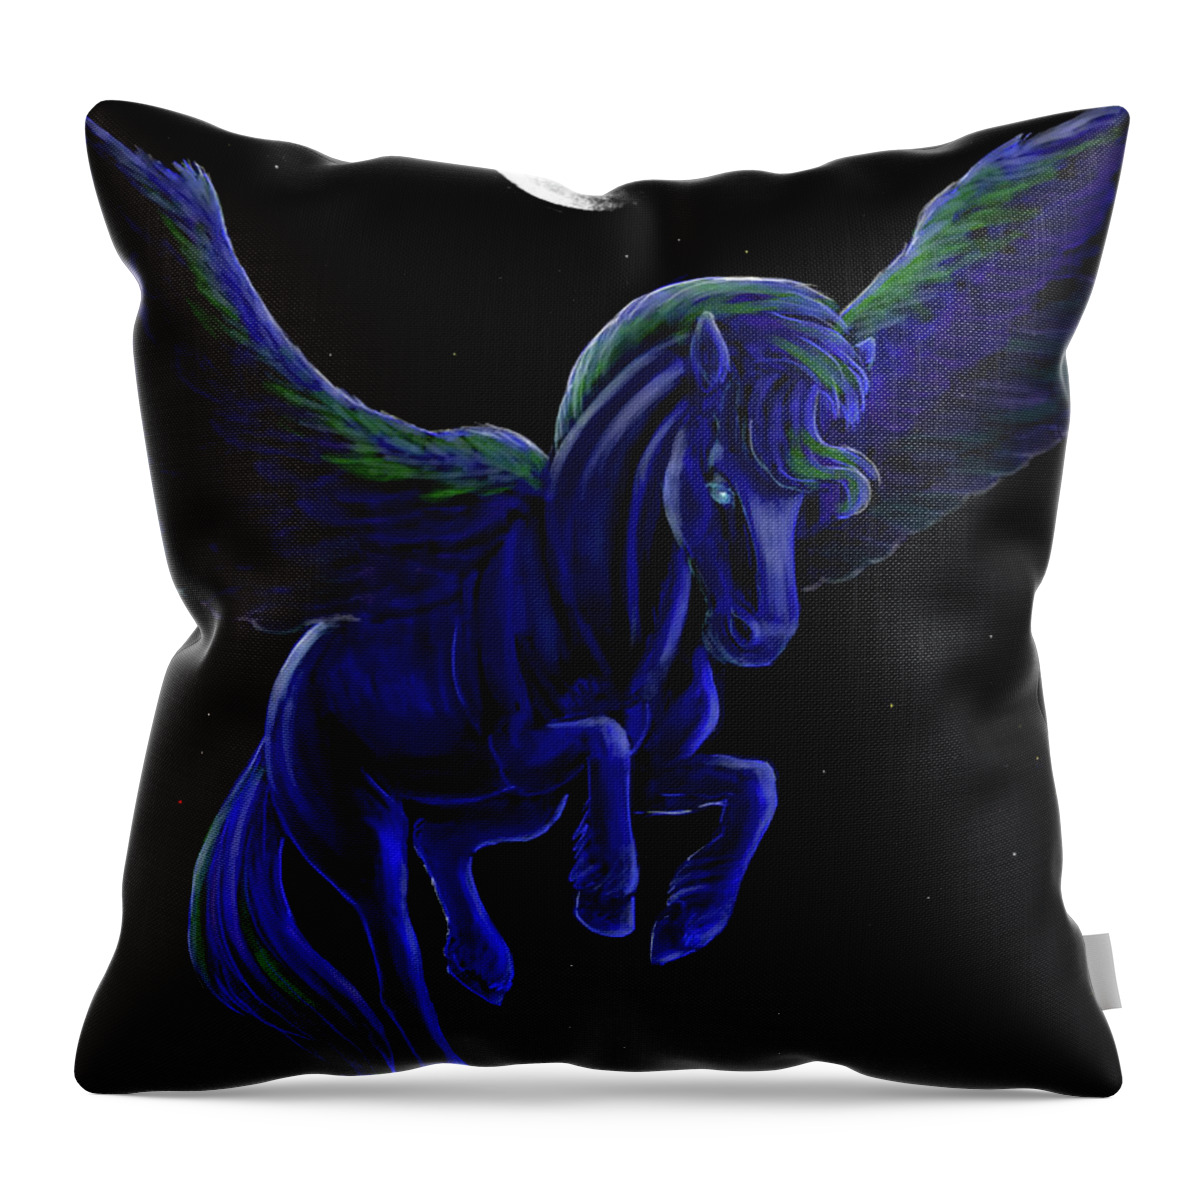 Digital Painting Throw Pillow featuring the digital art Moonlit Flight by Rohvannyn Shaw